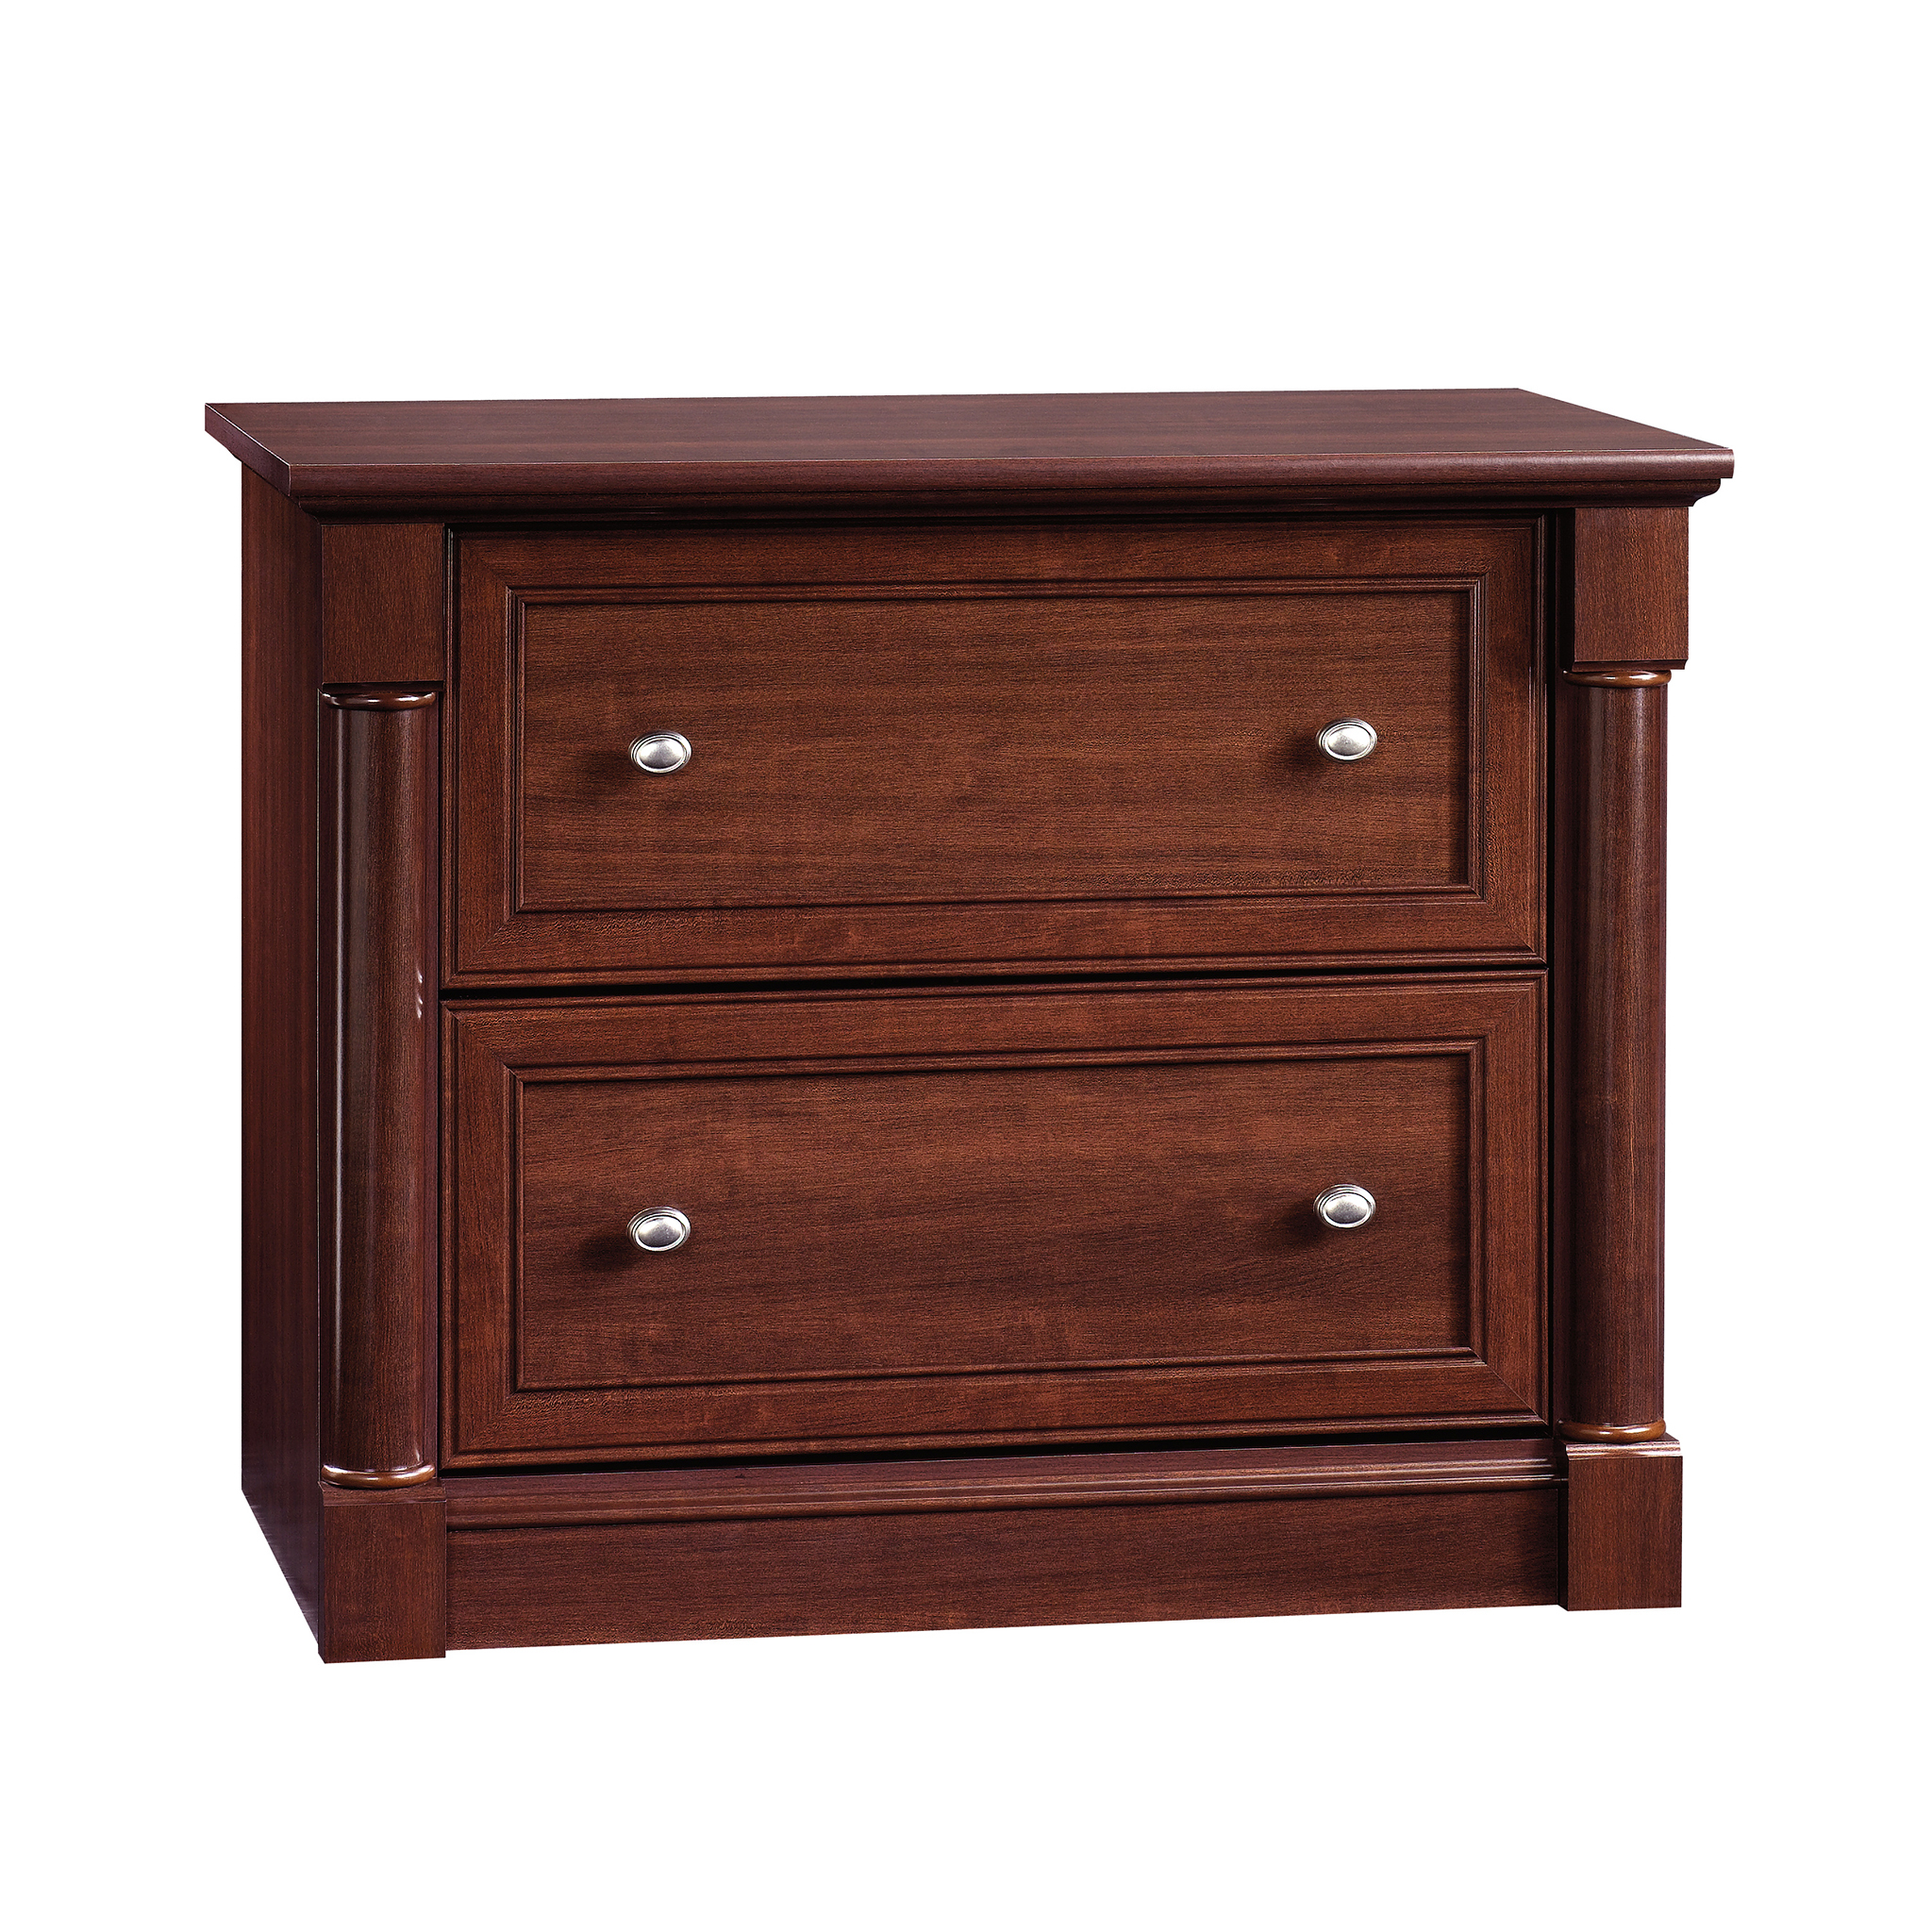 Sauder Palladia 2 Drawer Lateral File Select Cherry Finish pertaining to size 2048 X 2048